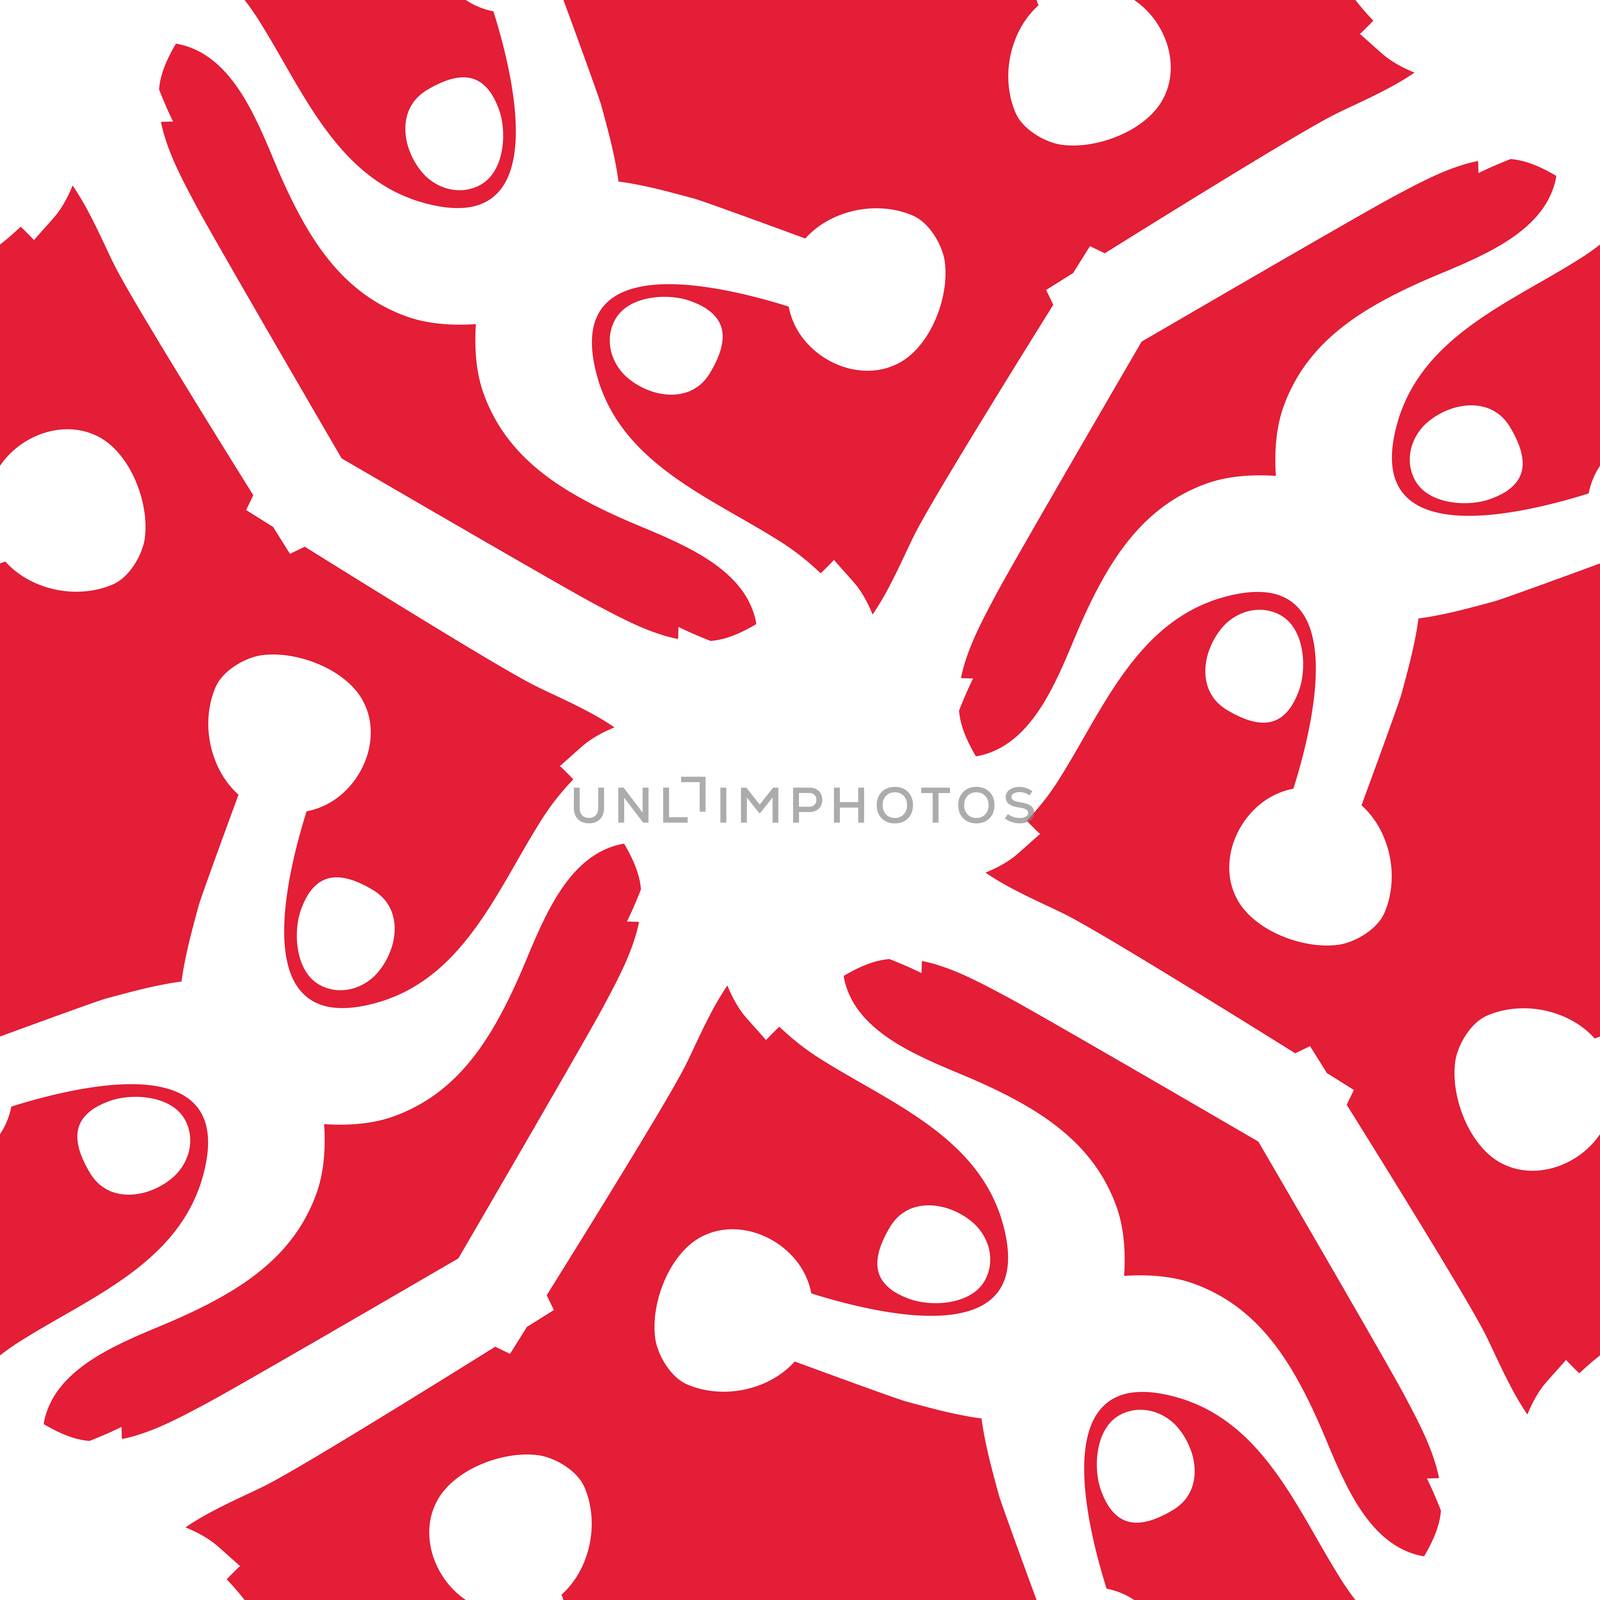 Repeating red background pattern of abstract circles and lines